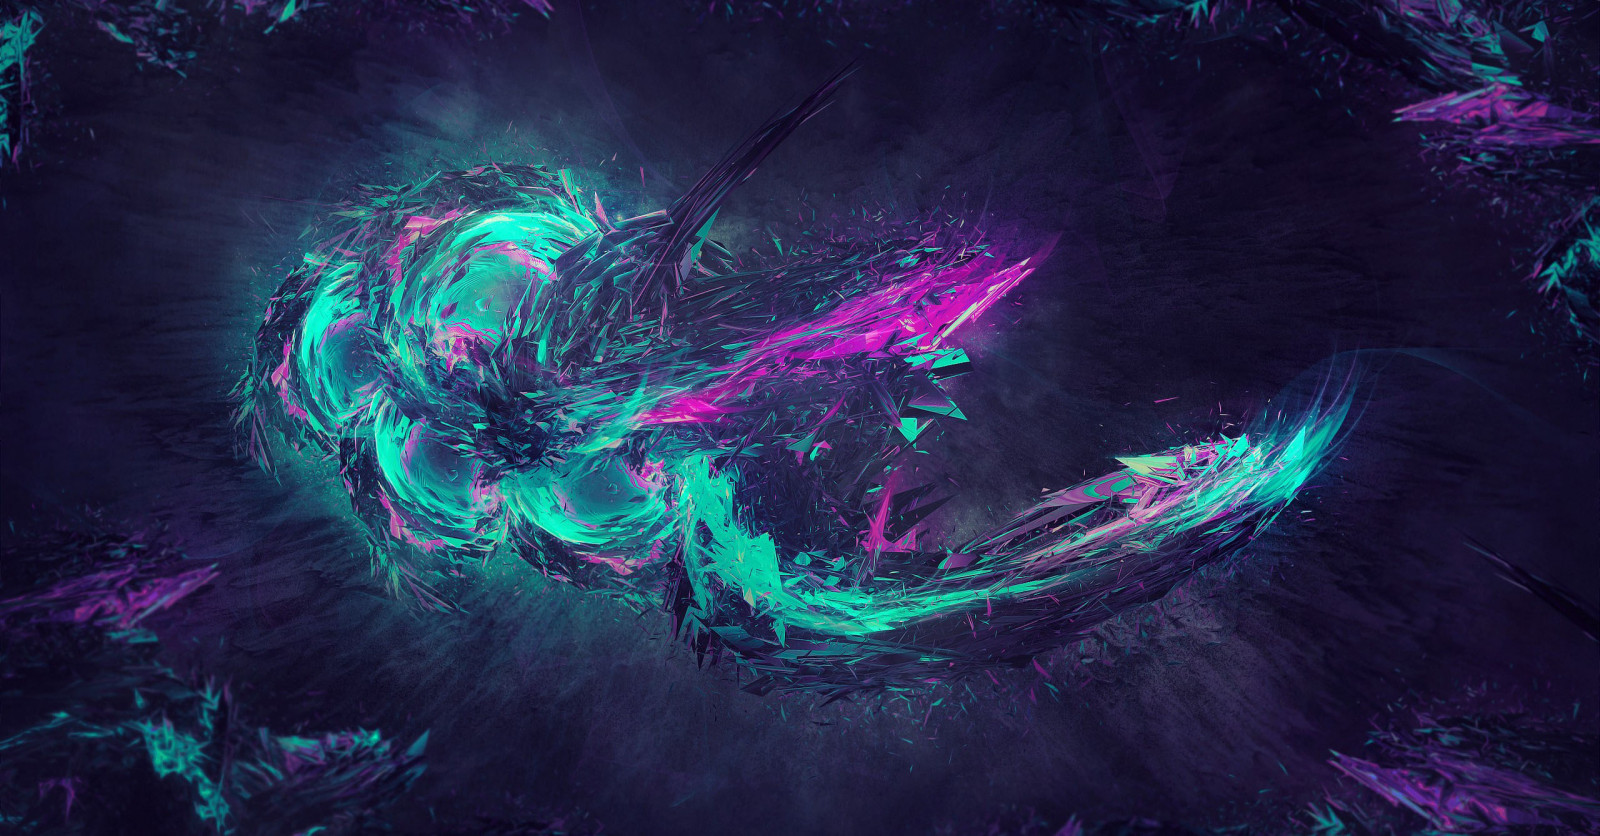 Wallpaper, illustration, space, purple, world, Japanese Art, darkness, screenshot, graphics, artworks, computer wallpaper, fractal art, special effects, organism, drawings, phenomenon, 2560x1339 px, colourful paints, cool image, Abstract 3D Art, Art 3D